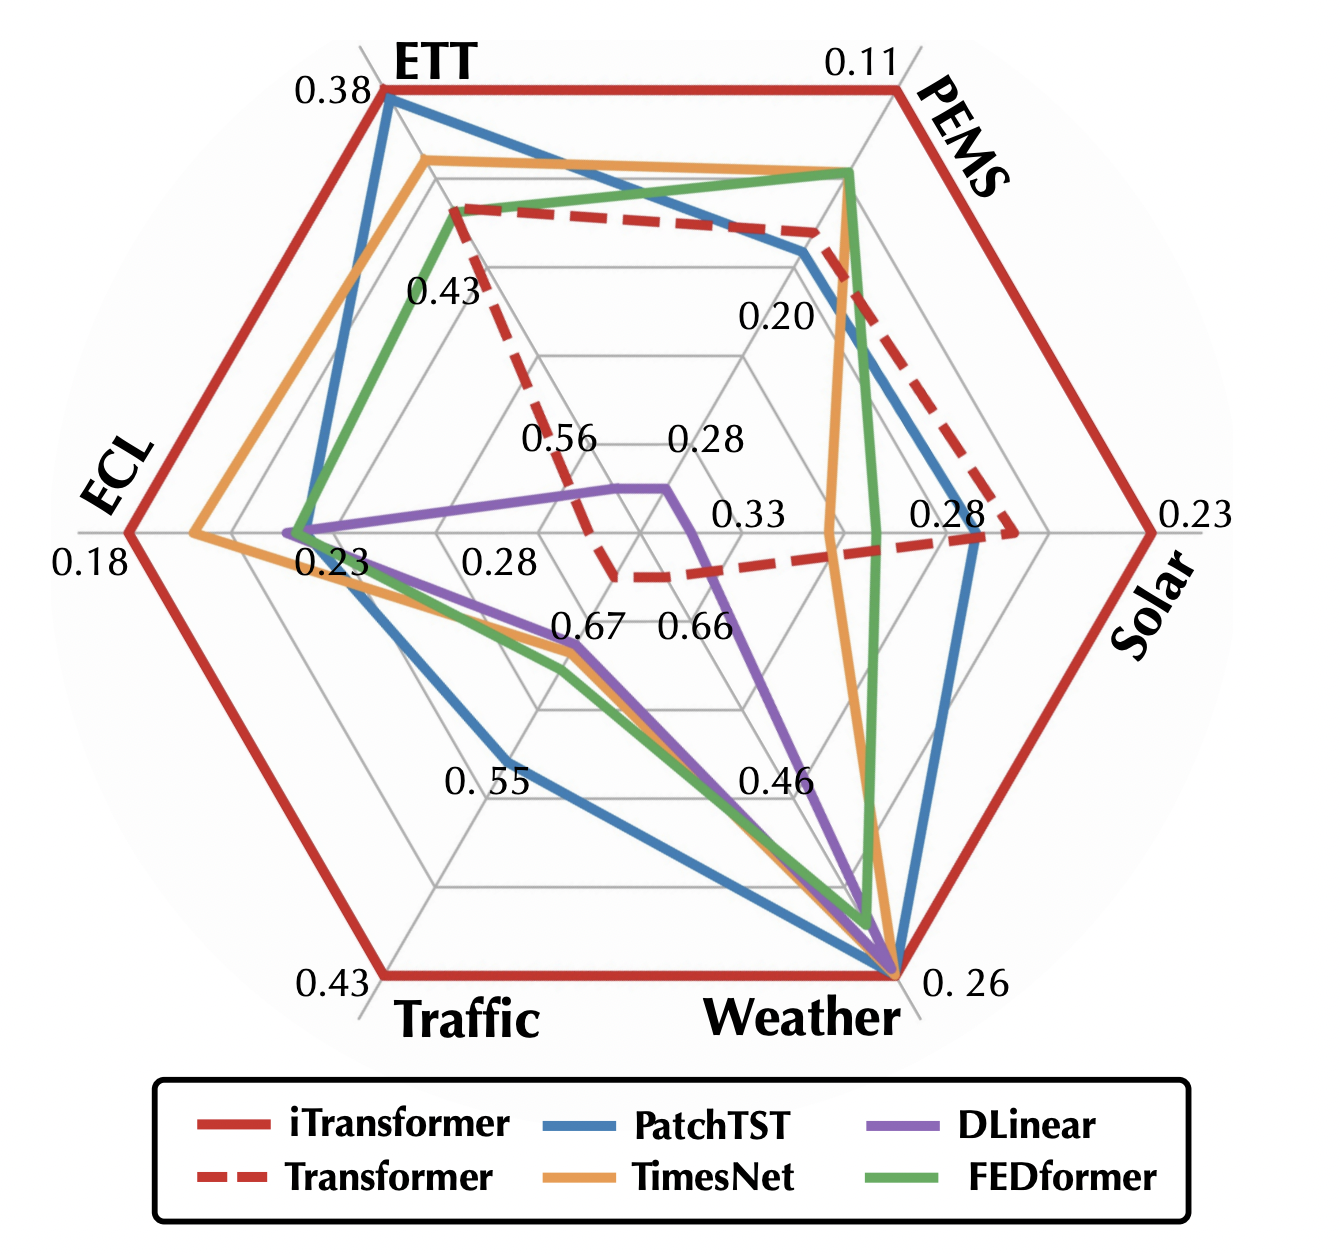 Researchers from China Propose iTransformer: Rethinking Transformer Architecture for Enhanced Time Series Forecasting